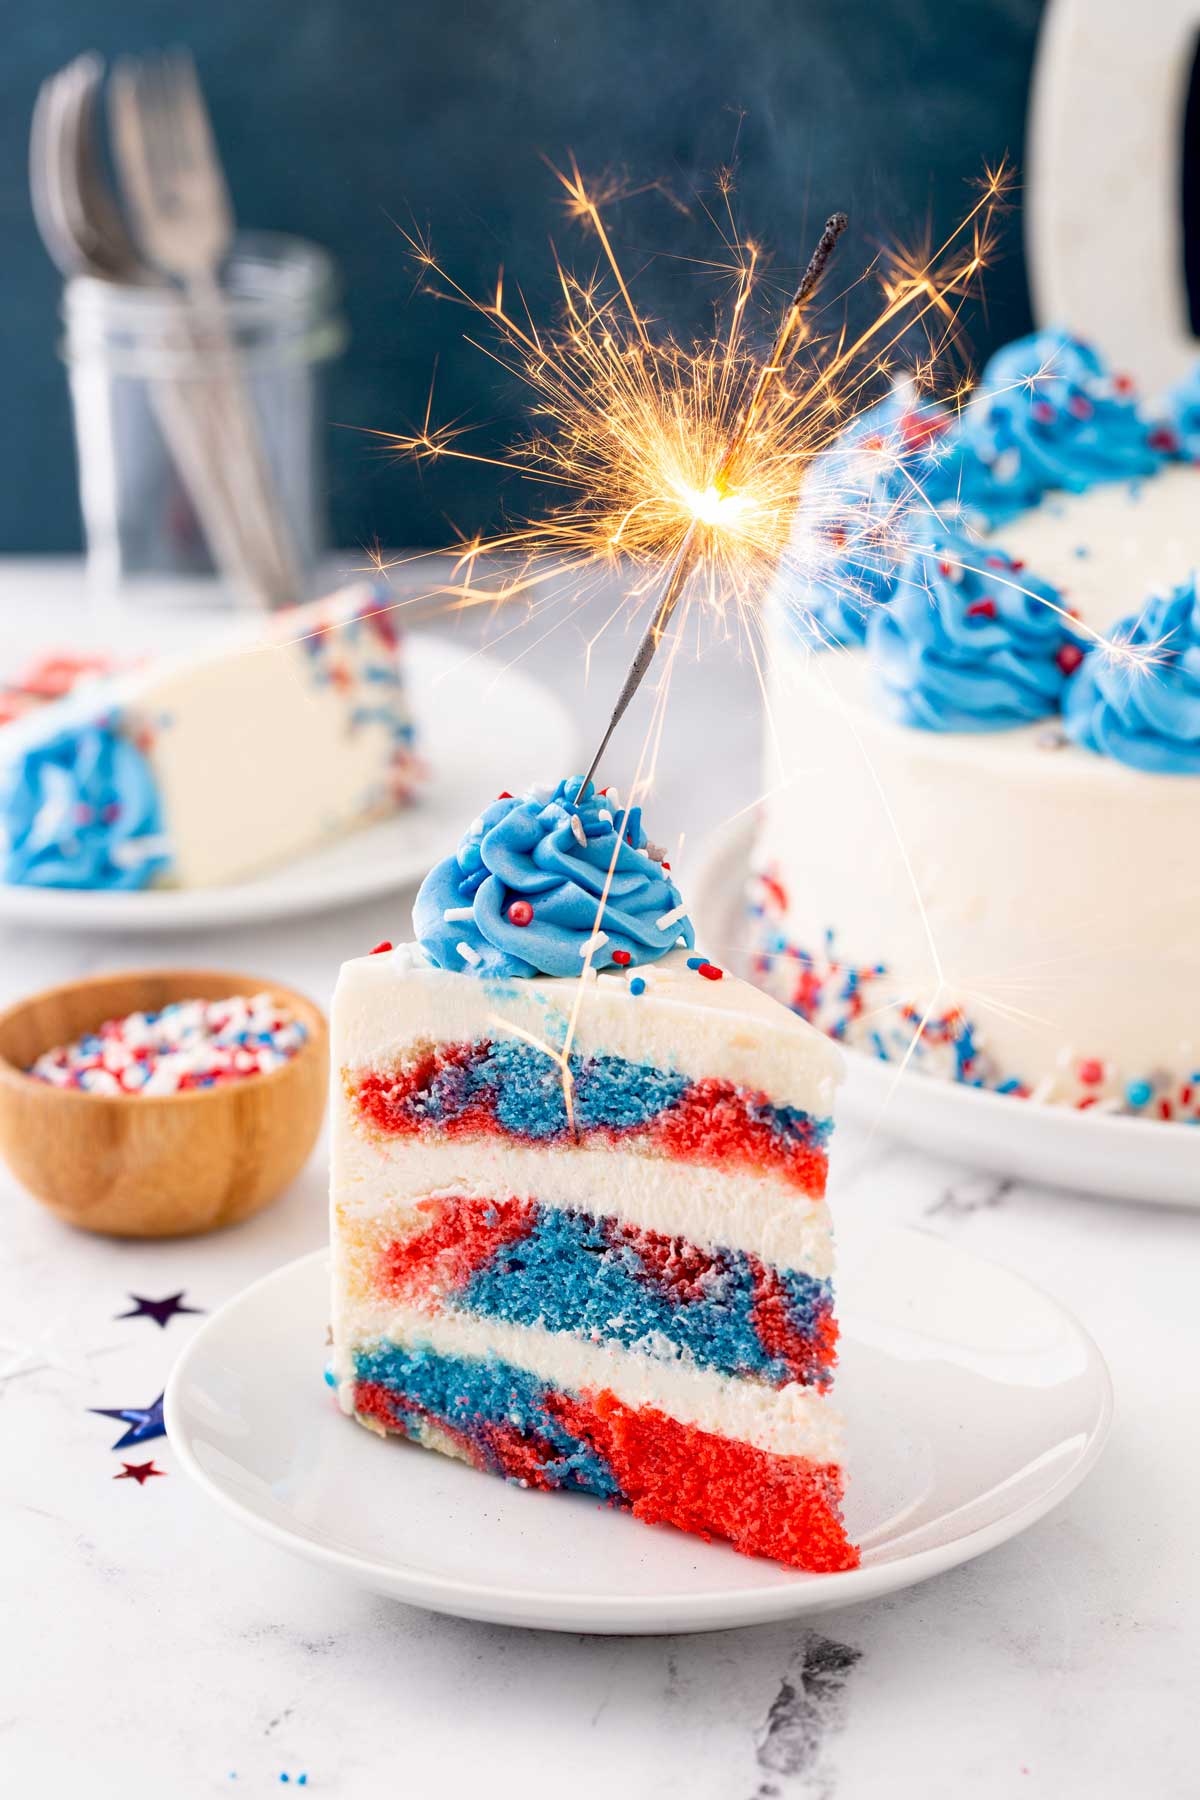 Red white and blue marble layered cake with a lit sparkler on top